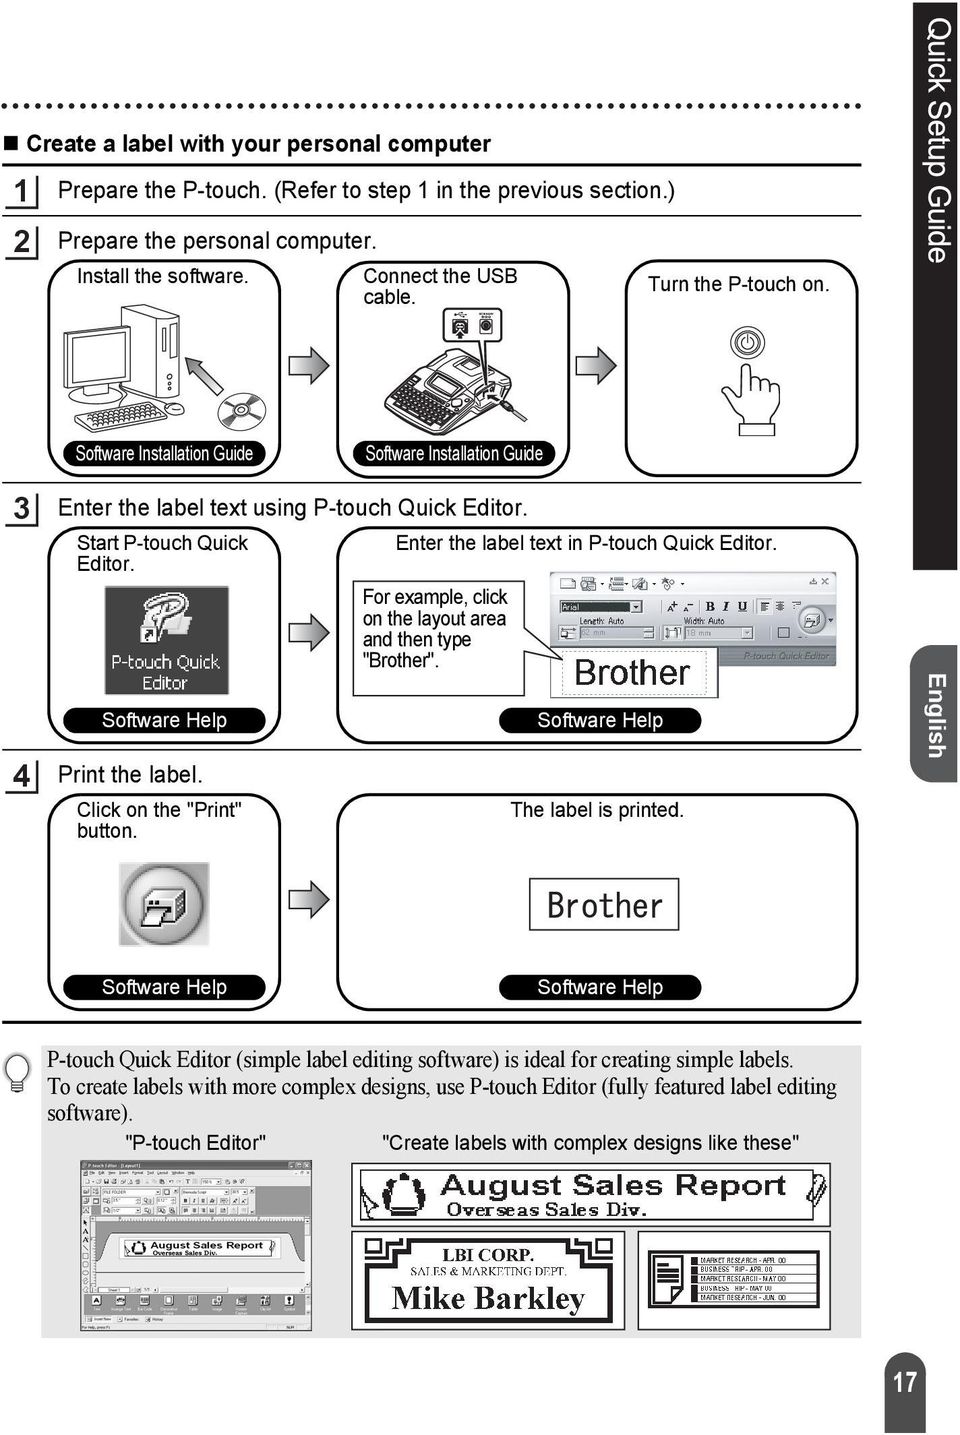 Editor. Software Help Print the label. Click on the "Print" button. For example, click on the layout area and then type "Brother". Software Help The label is printed.